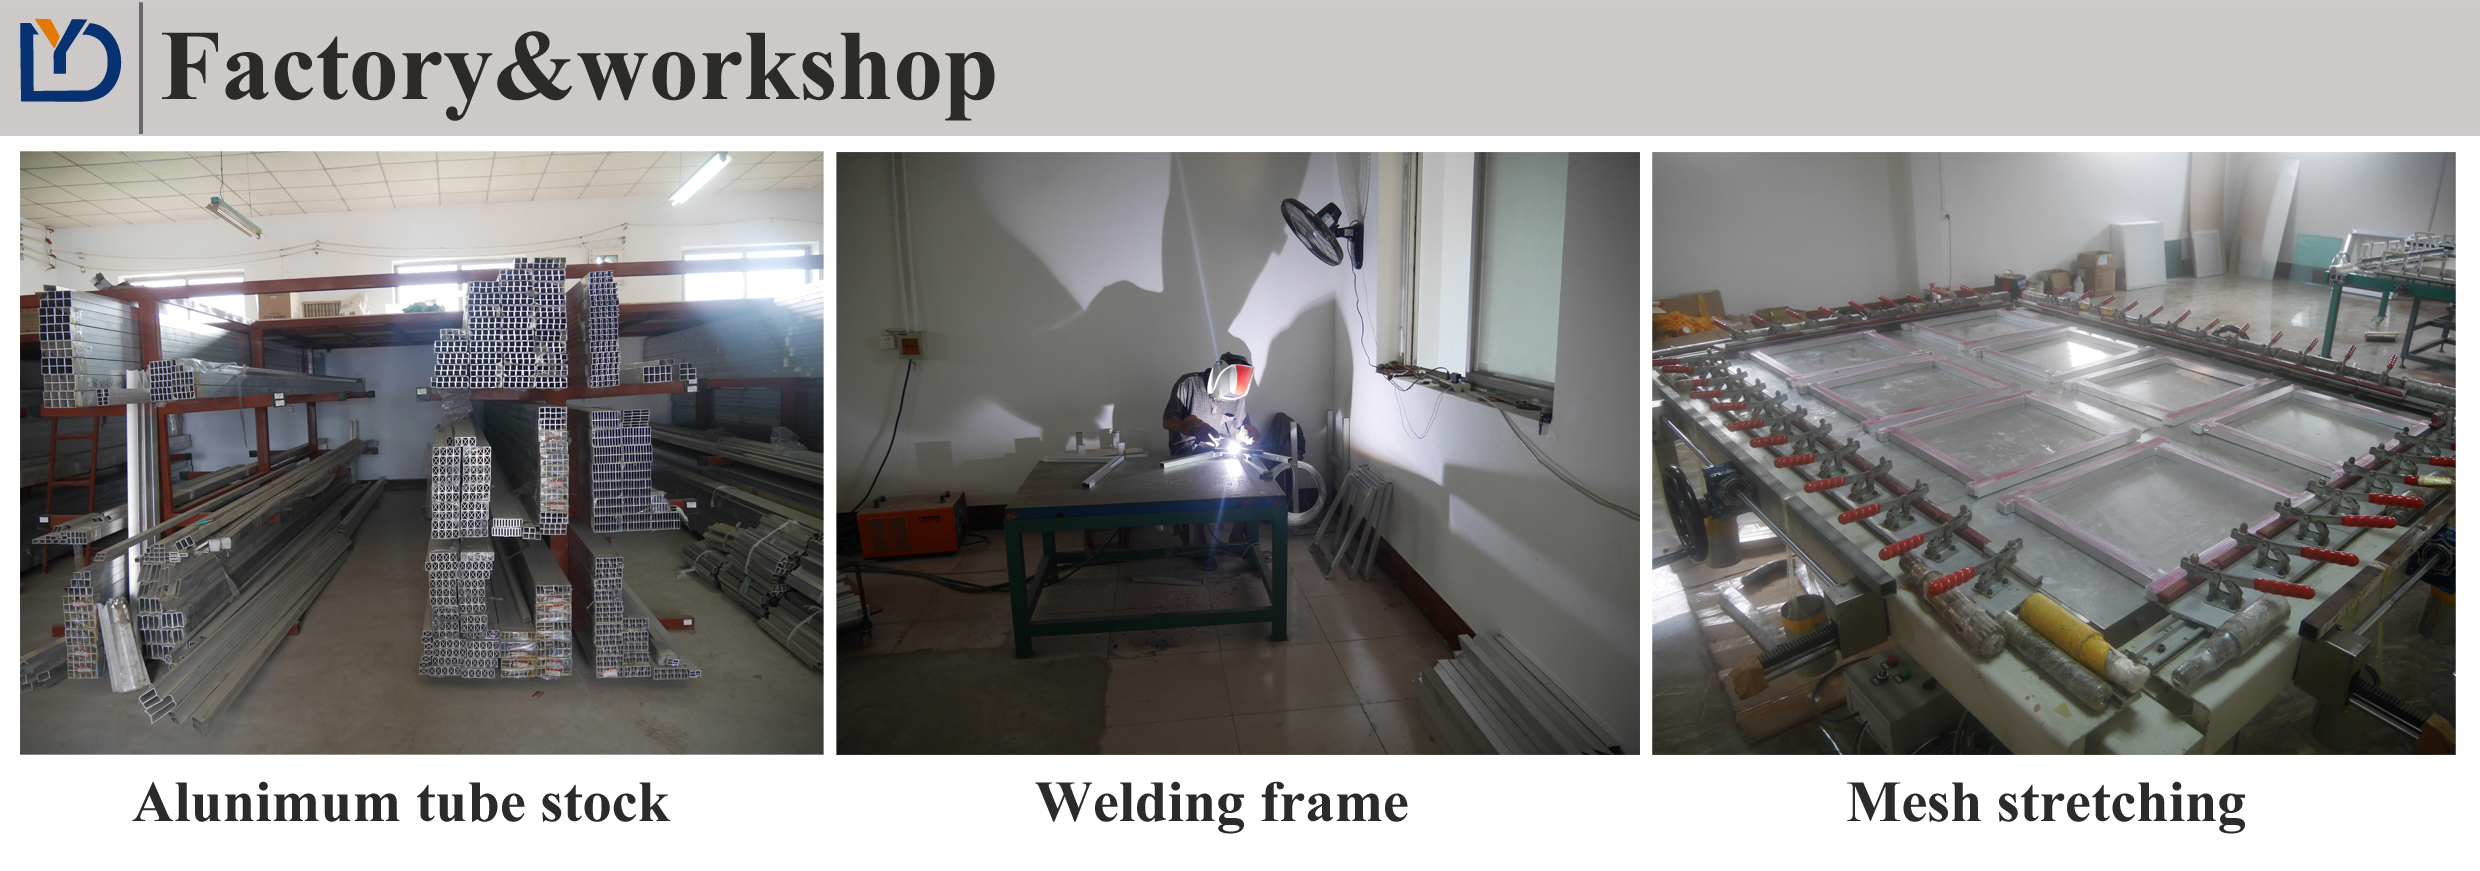 16x22inch line table printing frame with mesh 3.jpg